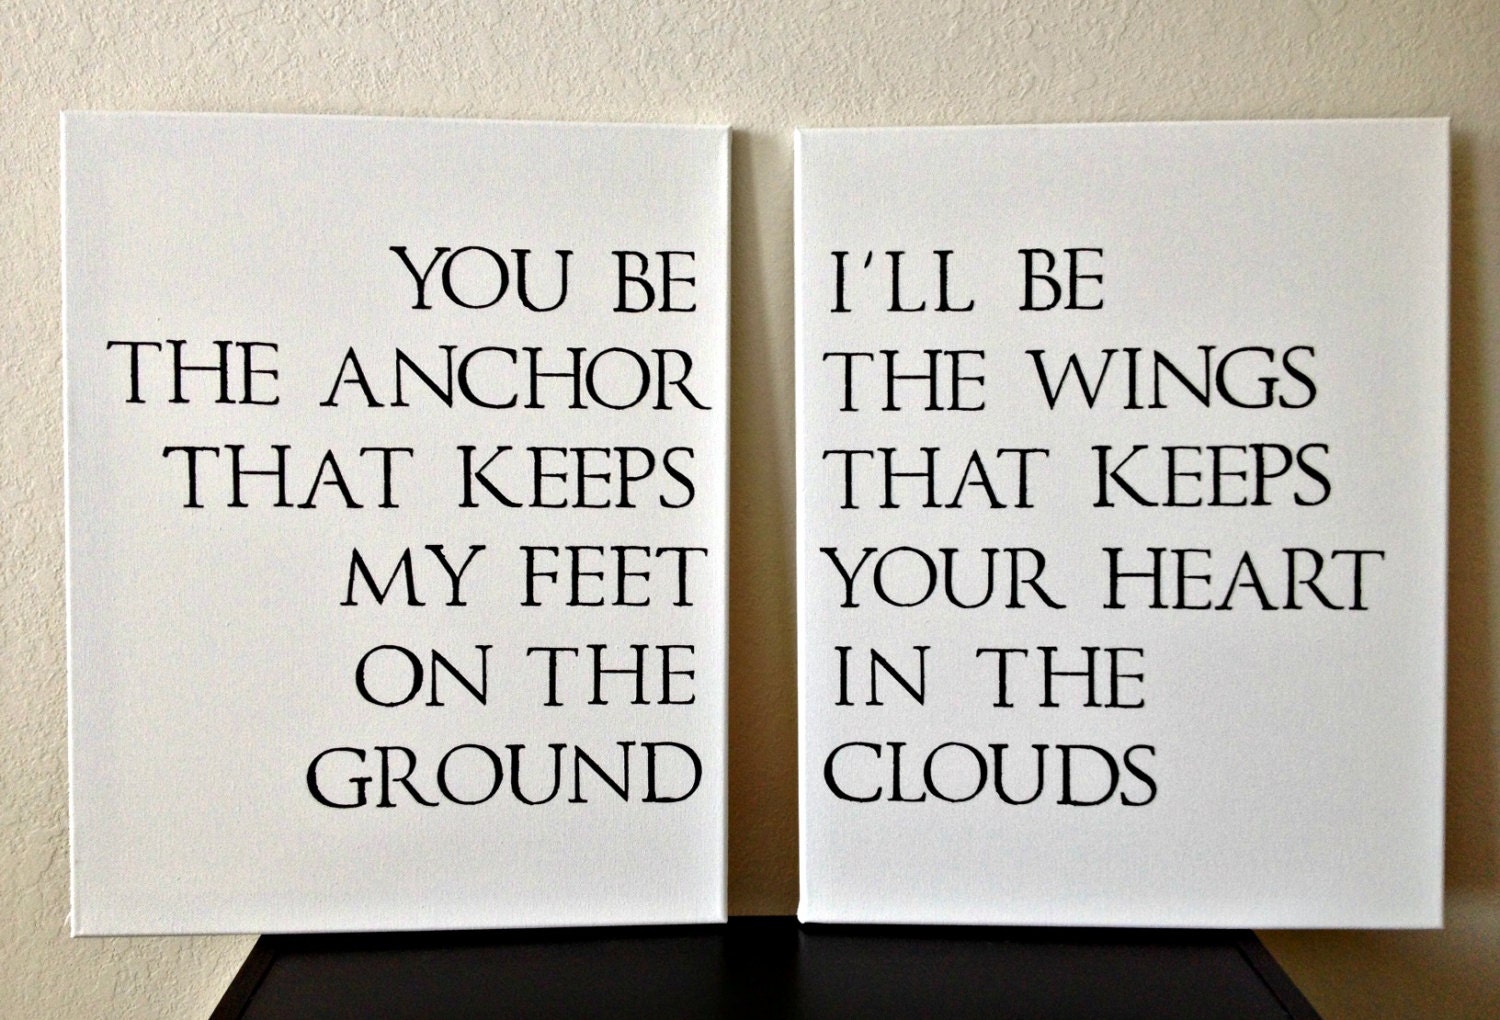 16x20inch Quote on Canvas - You Be The Anchor That Keeps My Feet On The Ground, I'll Be The Wings That Keeps Your Heart In The Clouds - DreamLoveBoutique